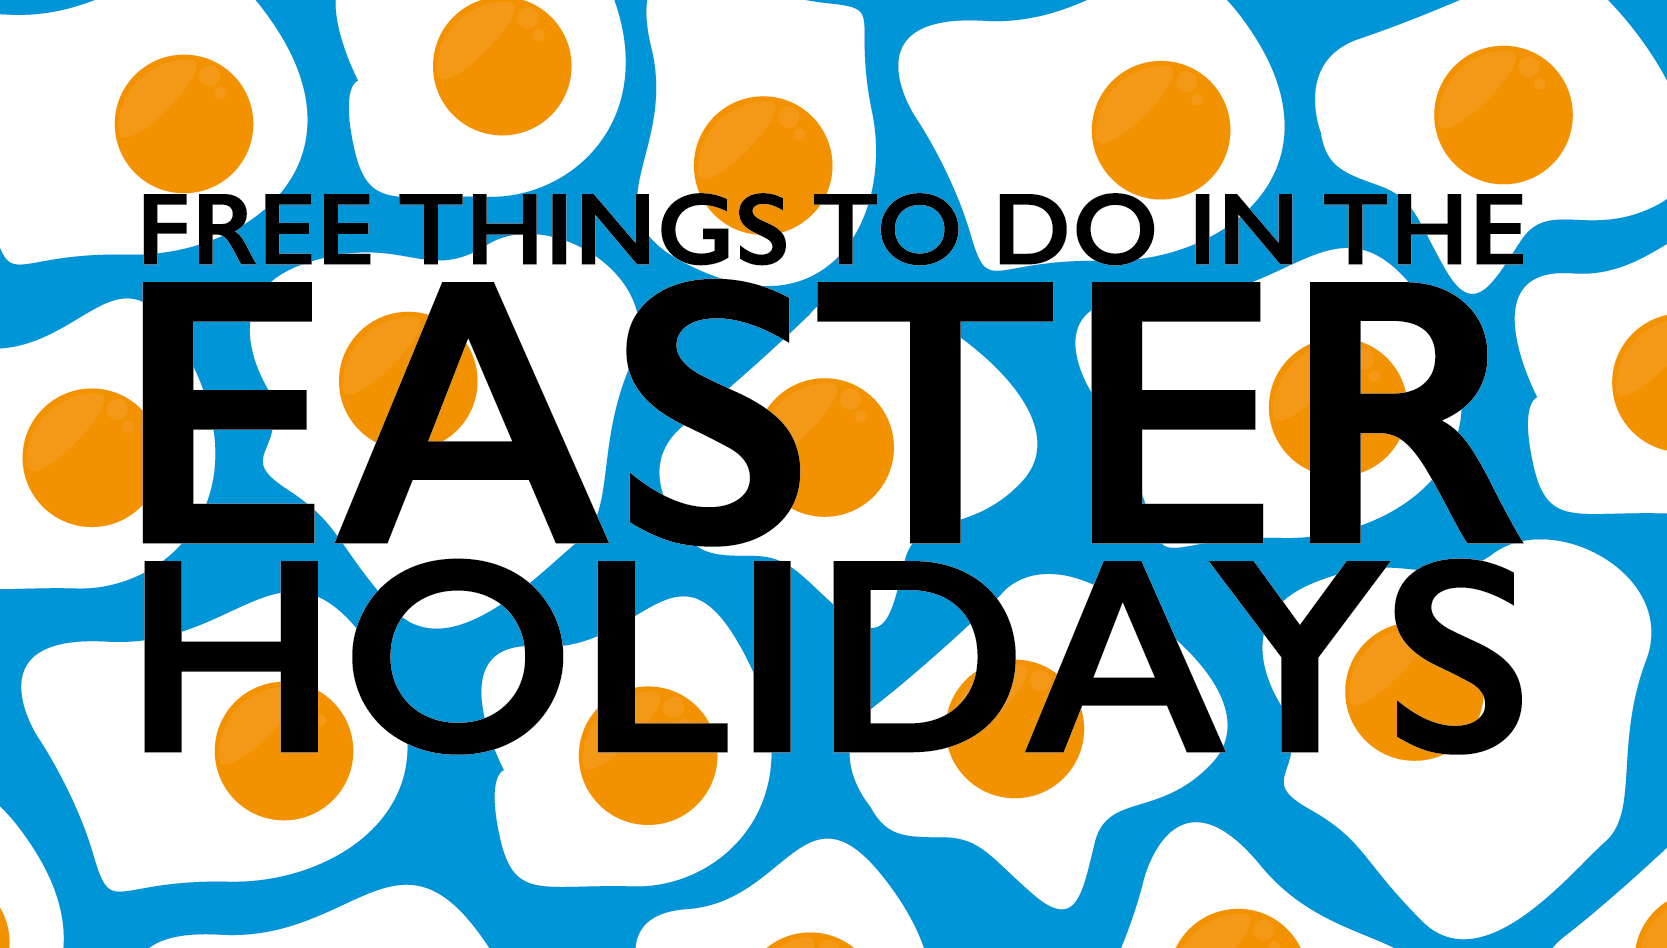 Free things to do in the Easter holidays